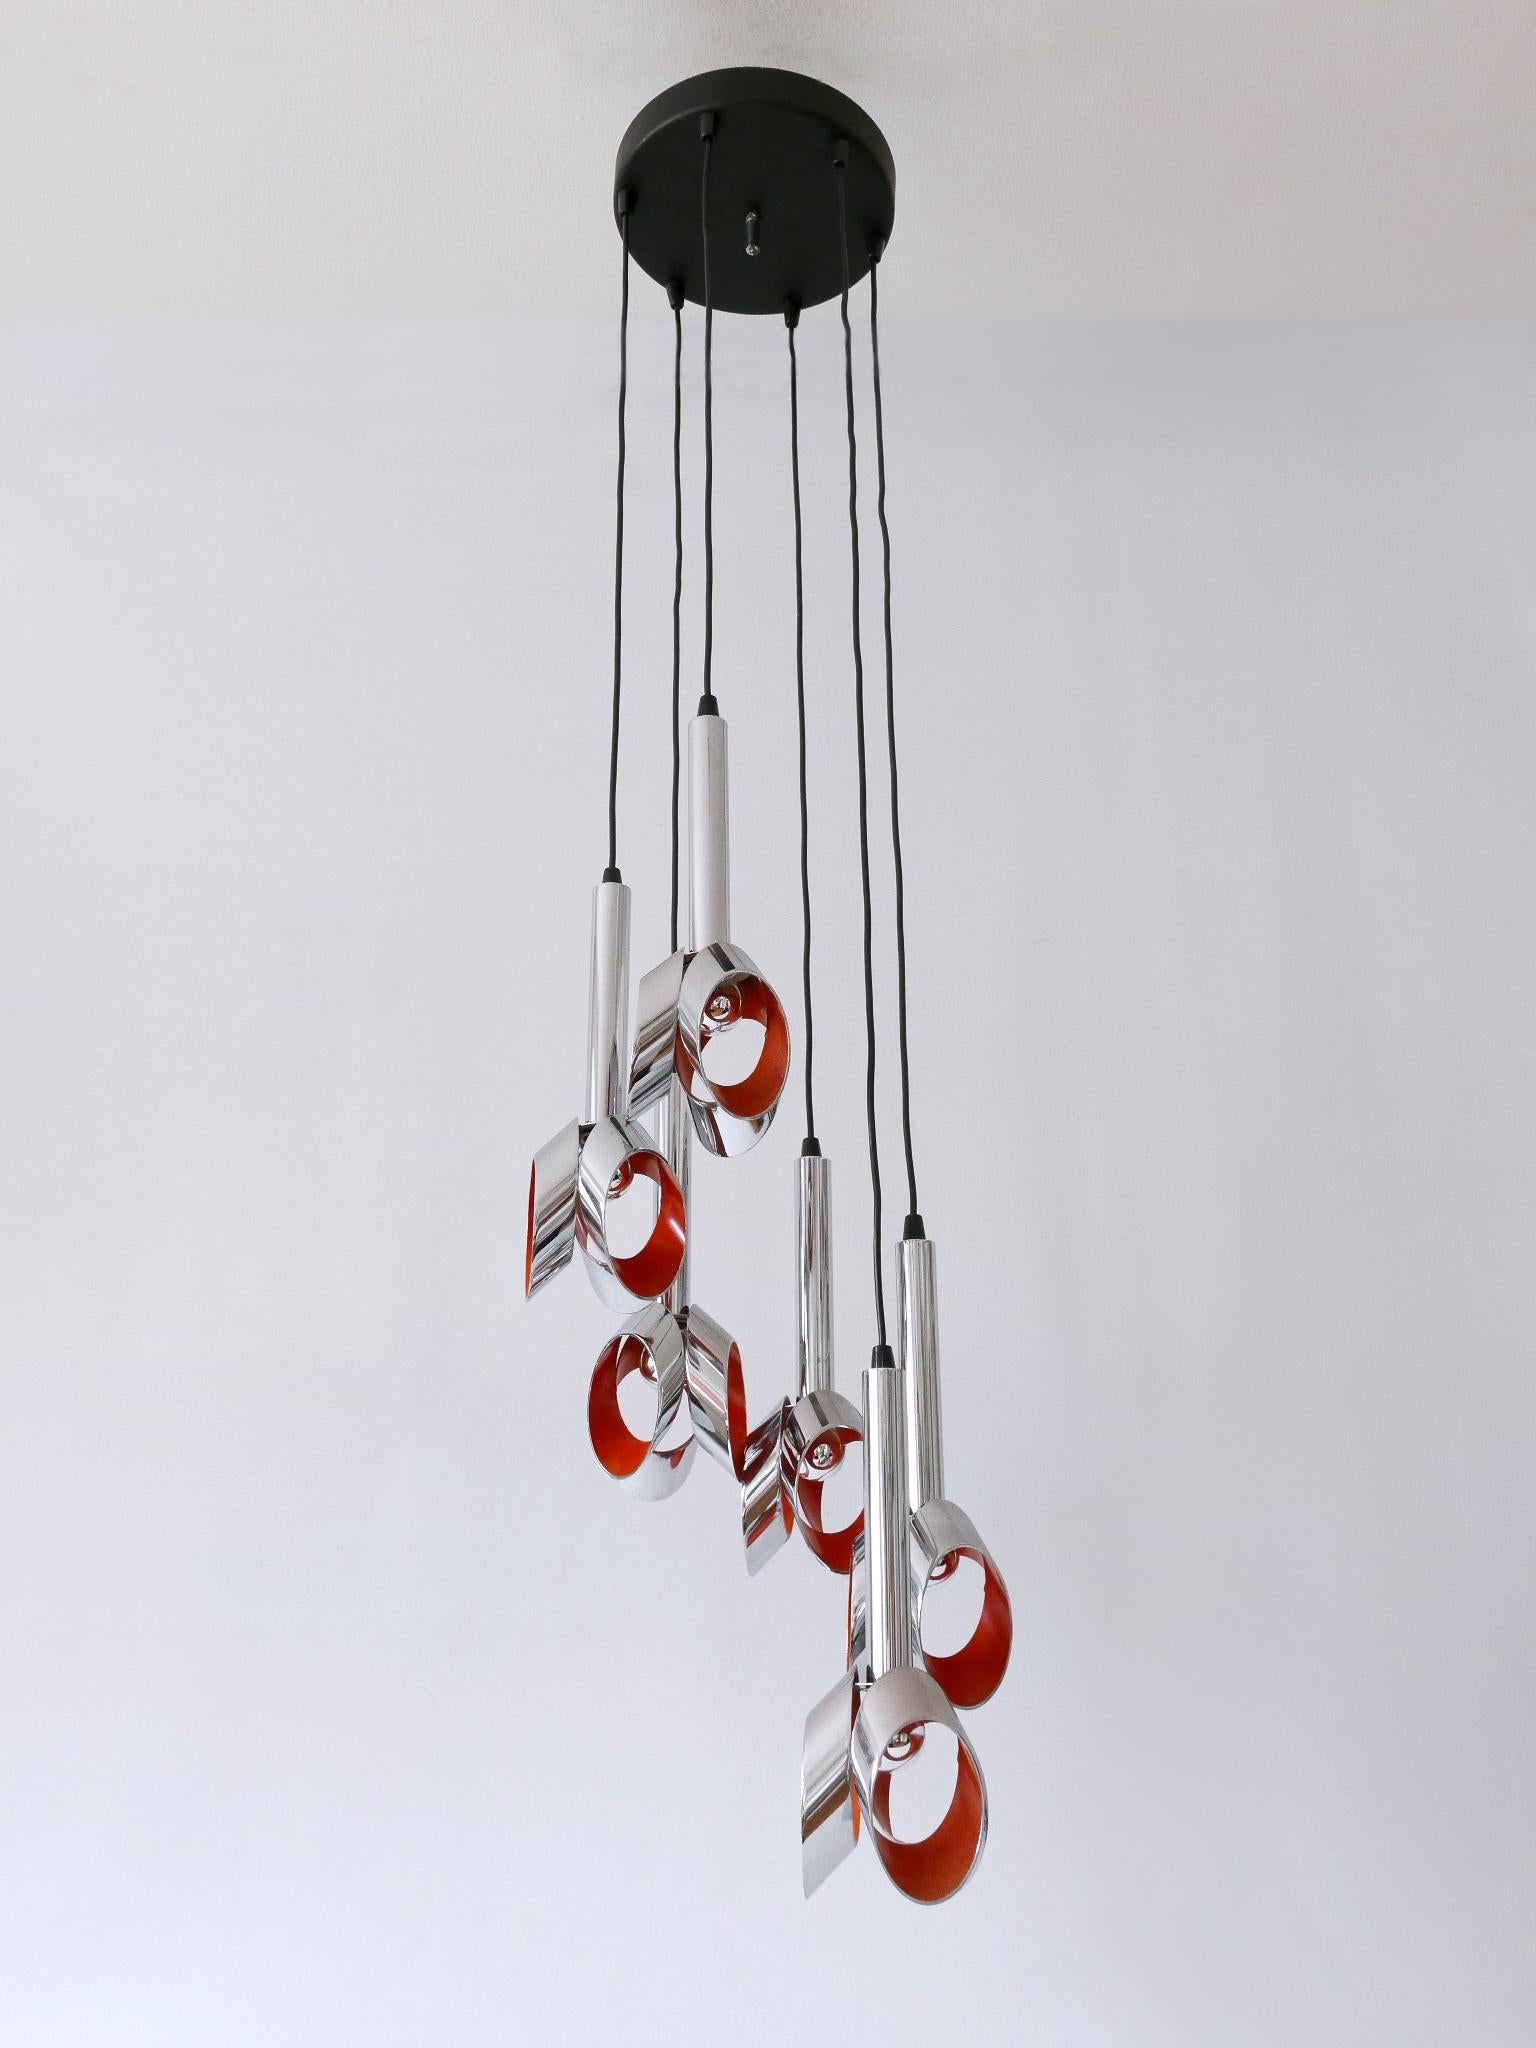 Exceptional Mid-Century Modern Six-Armed Tulip Chandelier or Pendant Lamp, 1970s For Sale 9